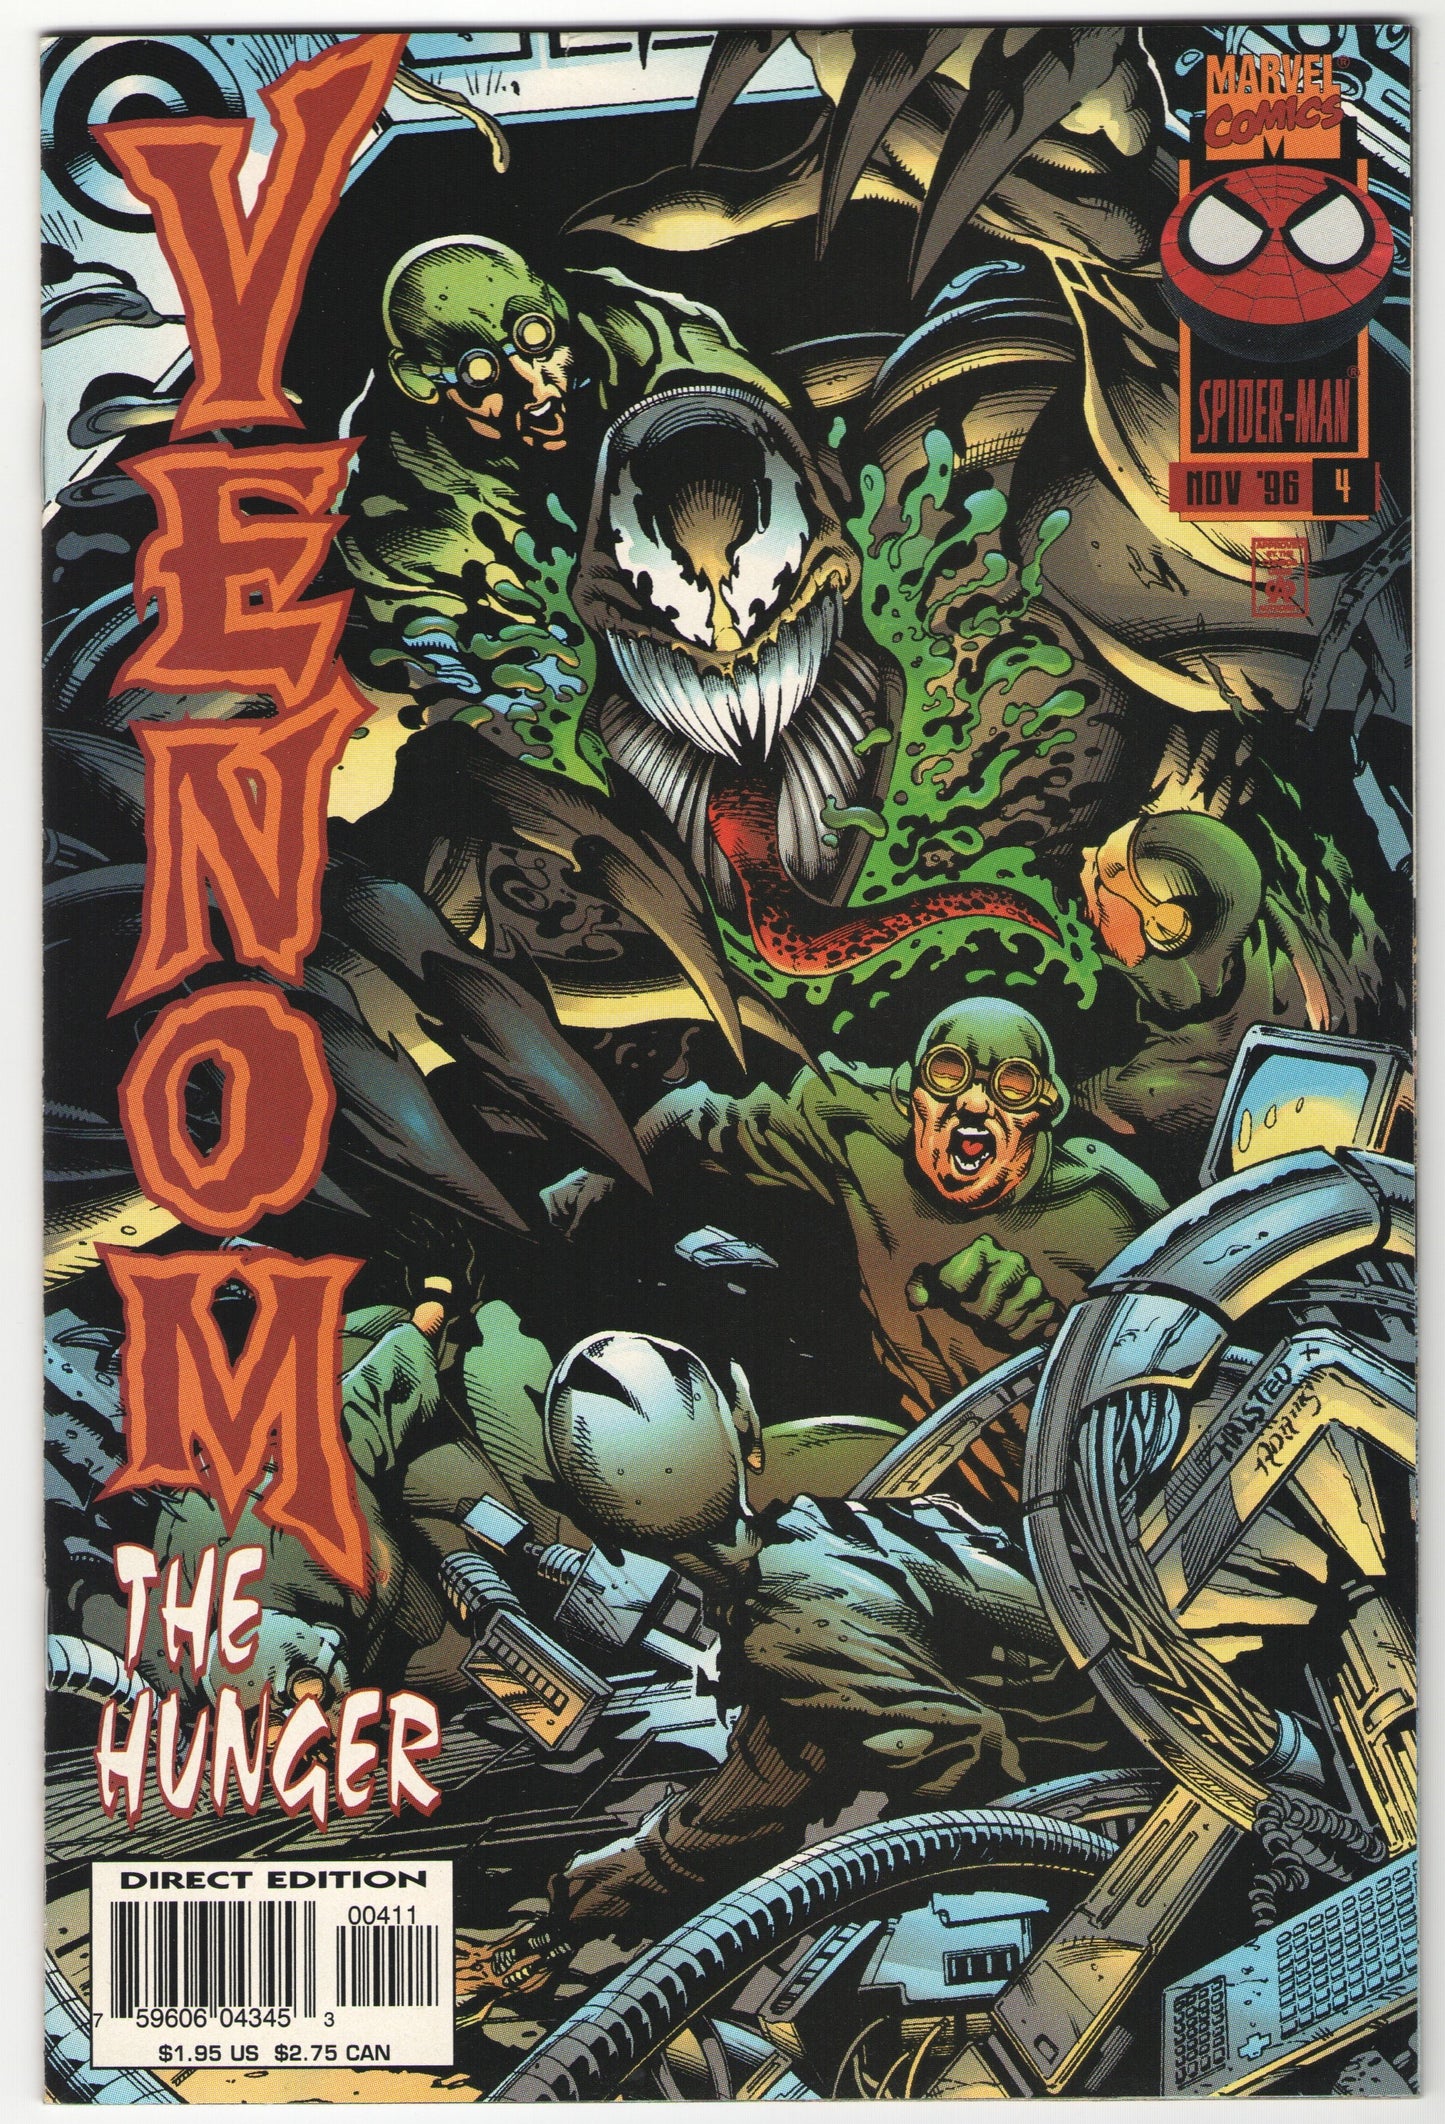 Venom: The Hunger (1996) Complete Limited Series